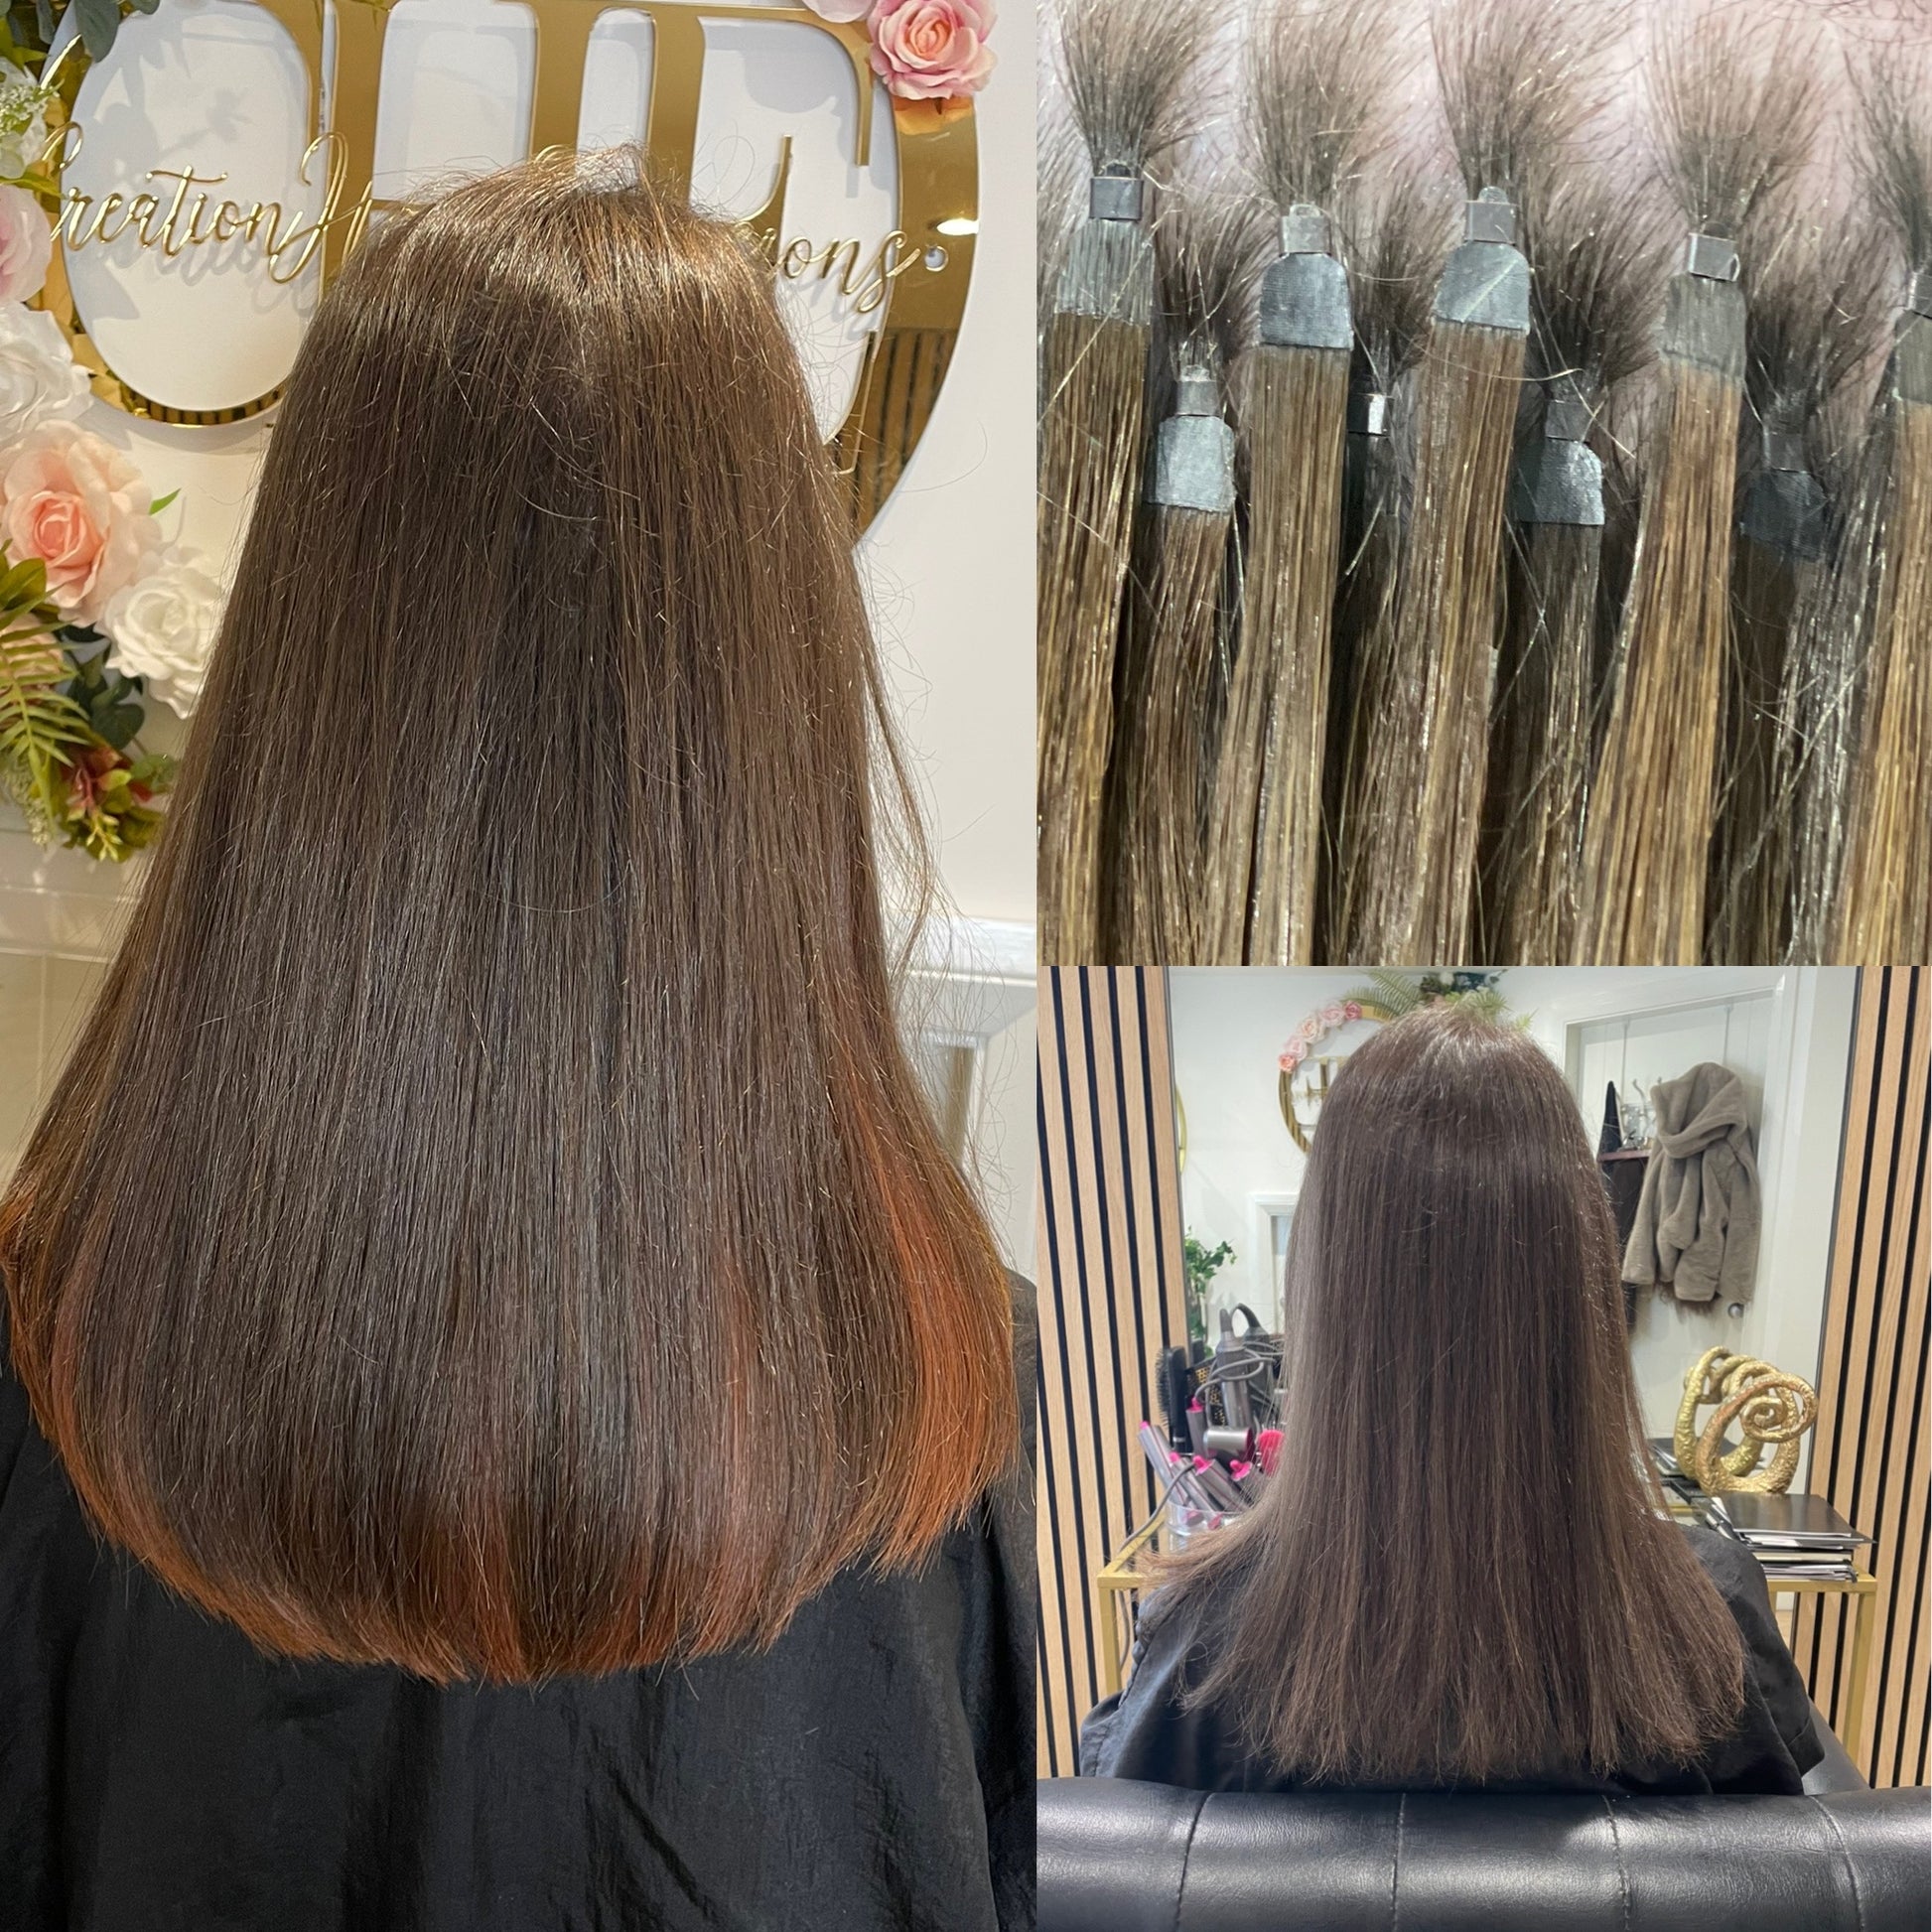 Expert Refit Services for Hair Extensions - Maintenance and Refit at Che Academy